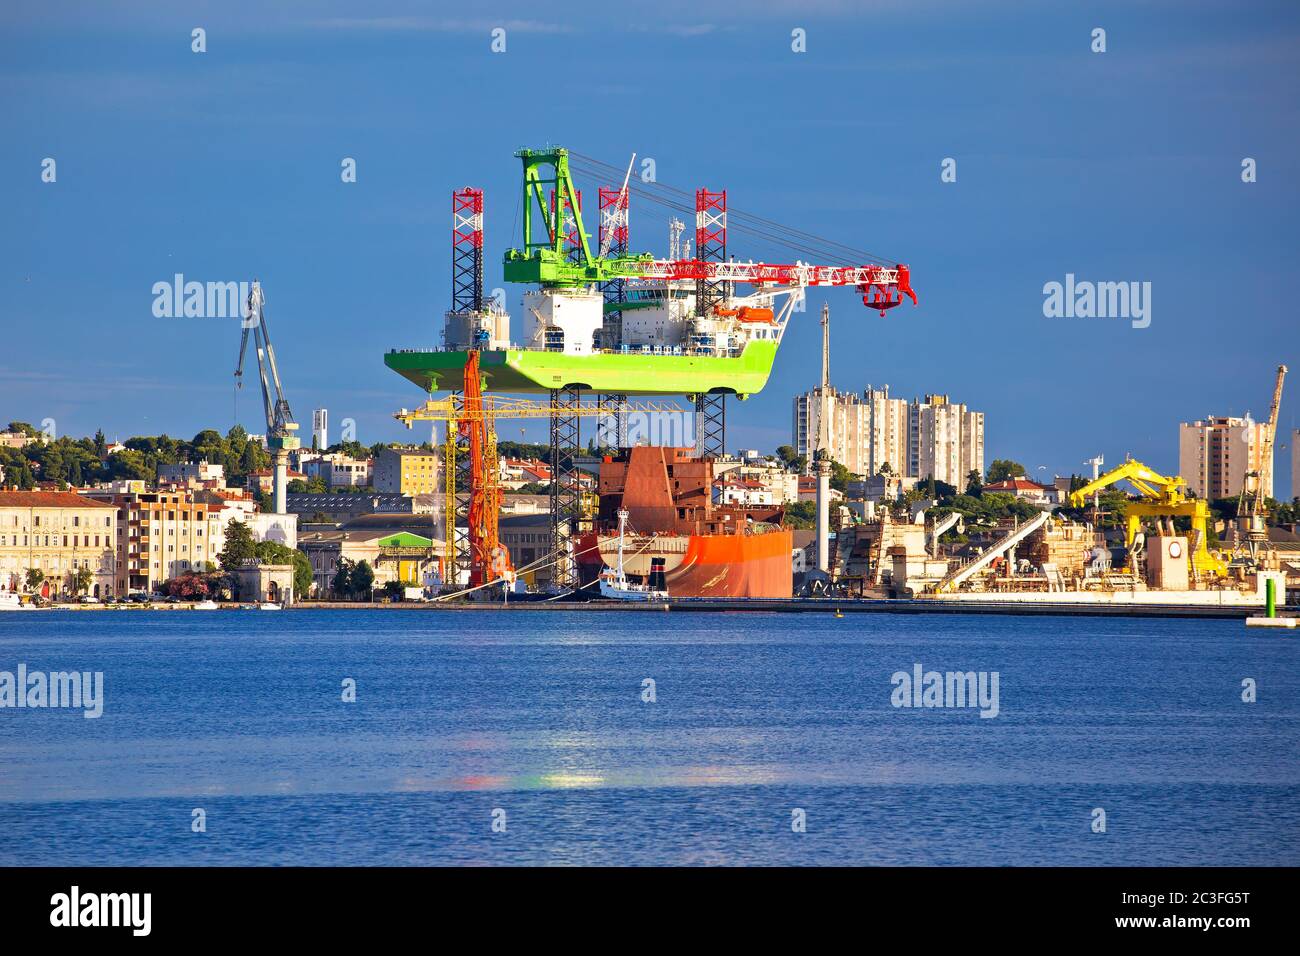 Town of Pula shipyard cranes view from the sea Stock Photo